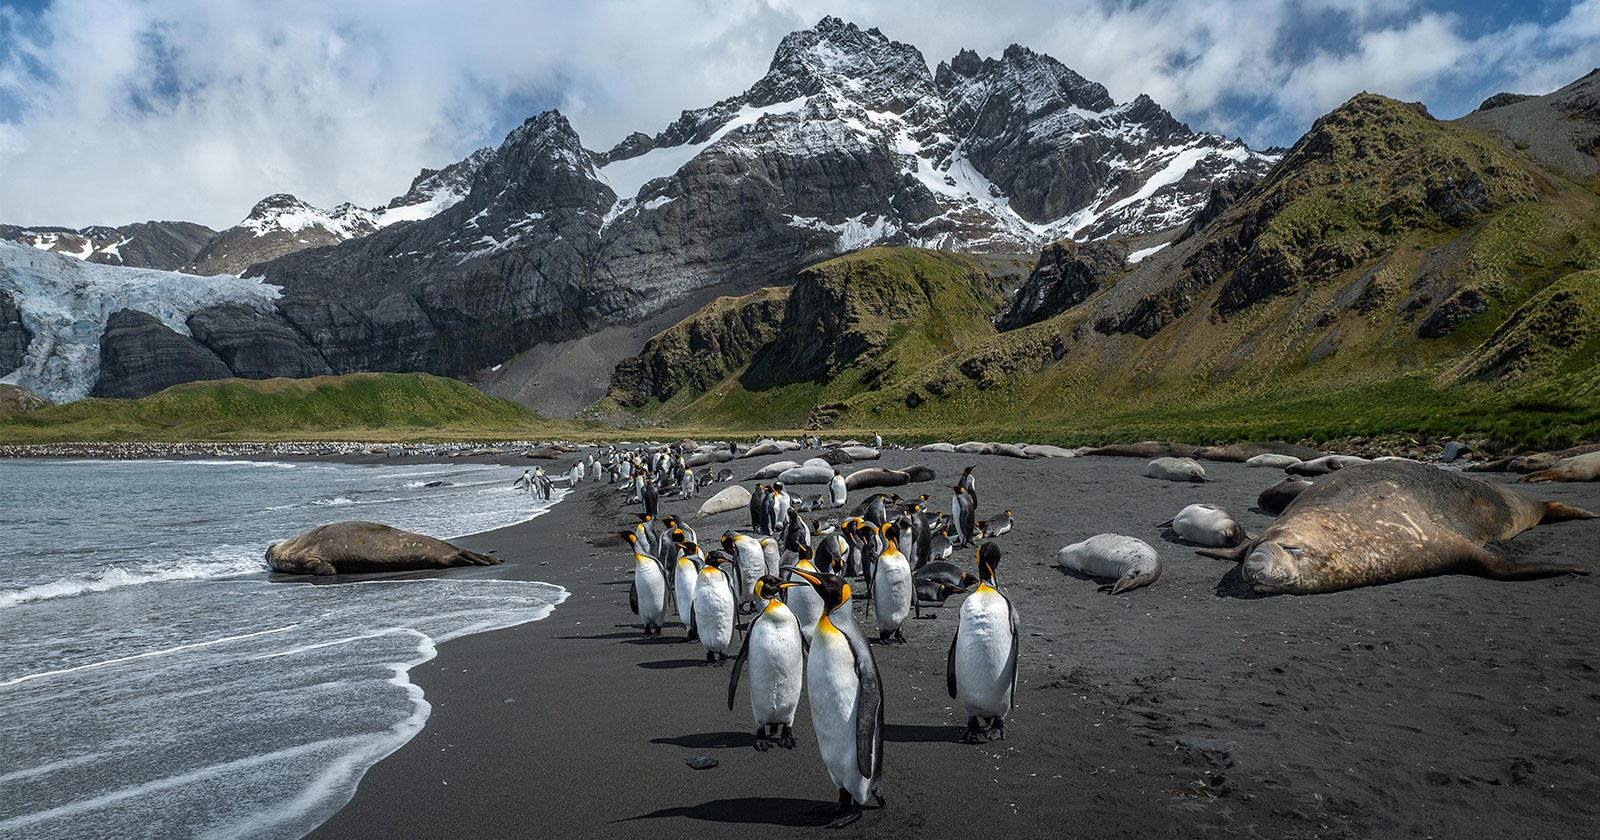 Photographing Antarctica: Penguins, Seals, and a Total Solar Eclipse